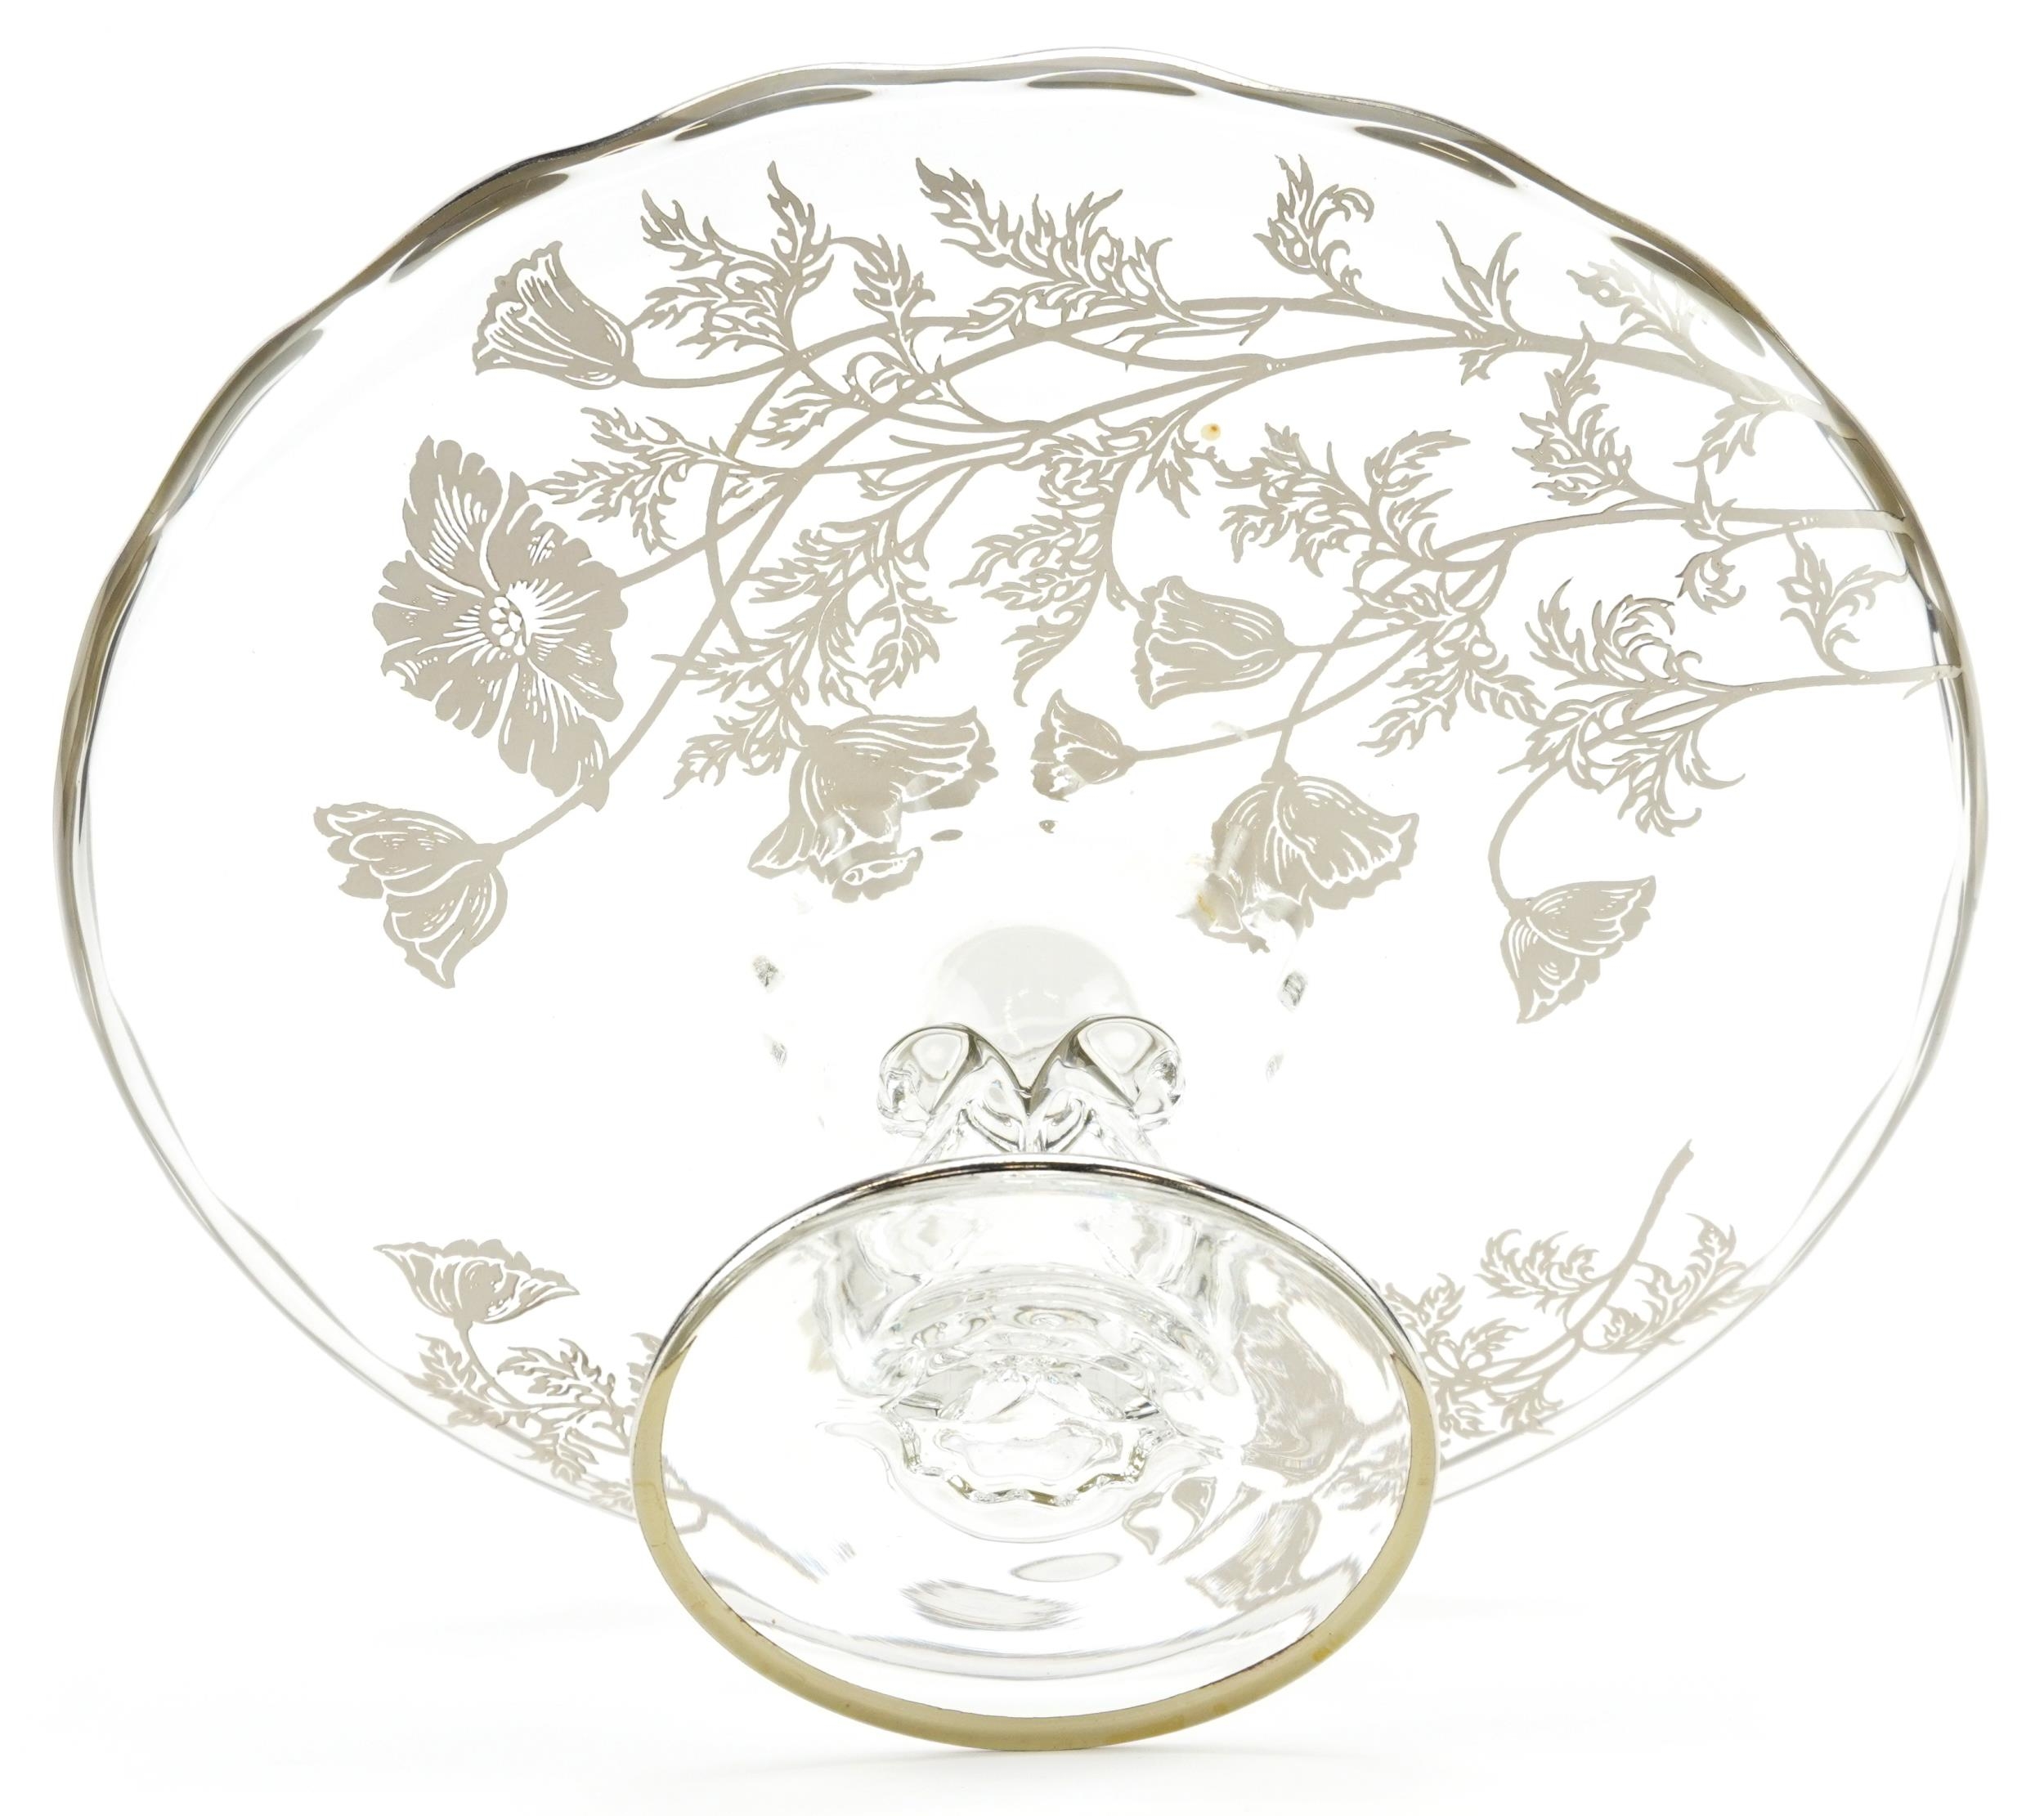 Continental silver overlaid pedestal glass tazza, 13.5cm high x 29.5cm in diameter - Image 3 of 3